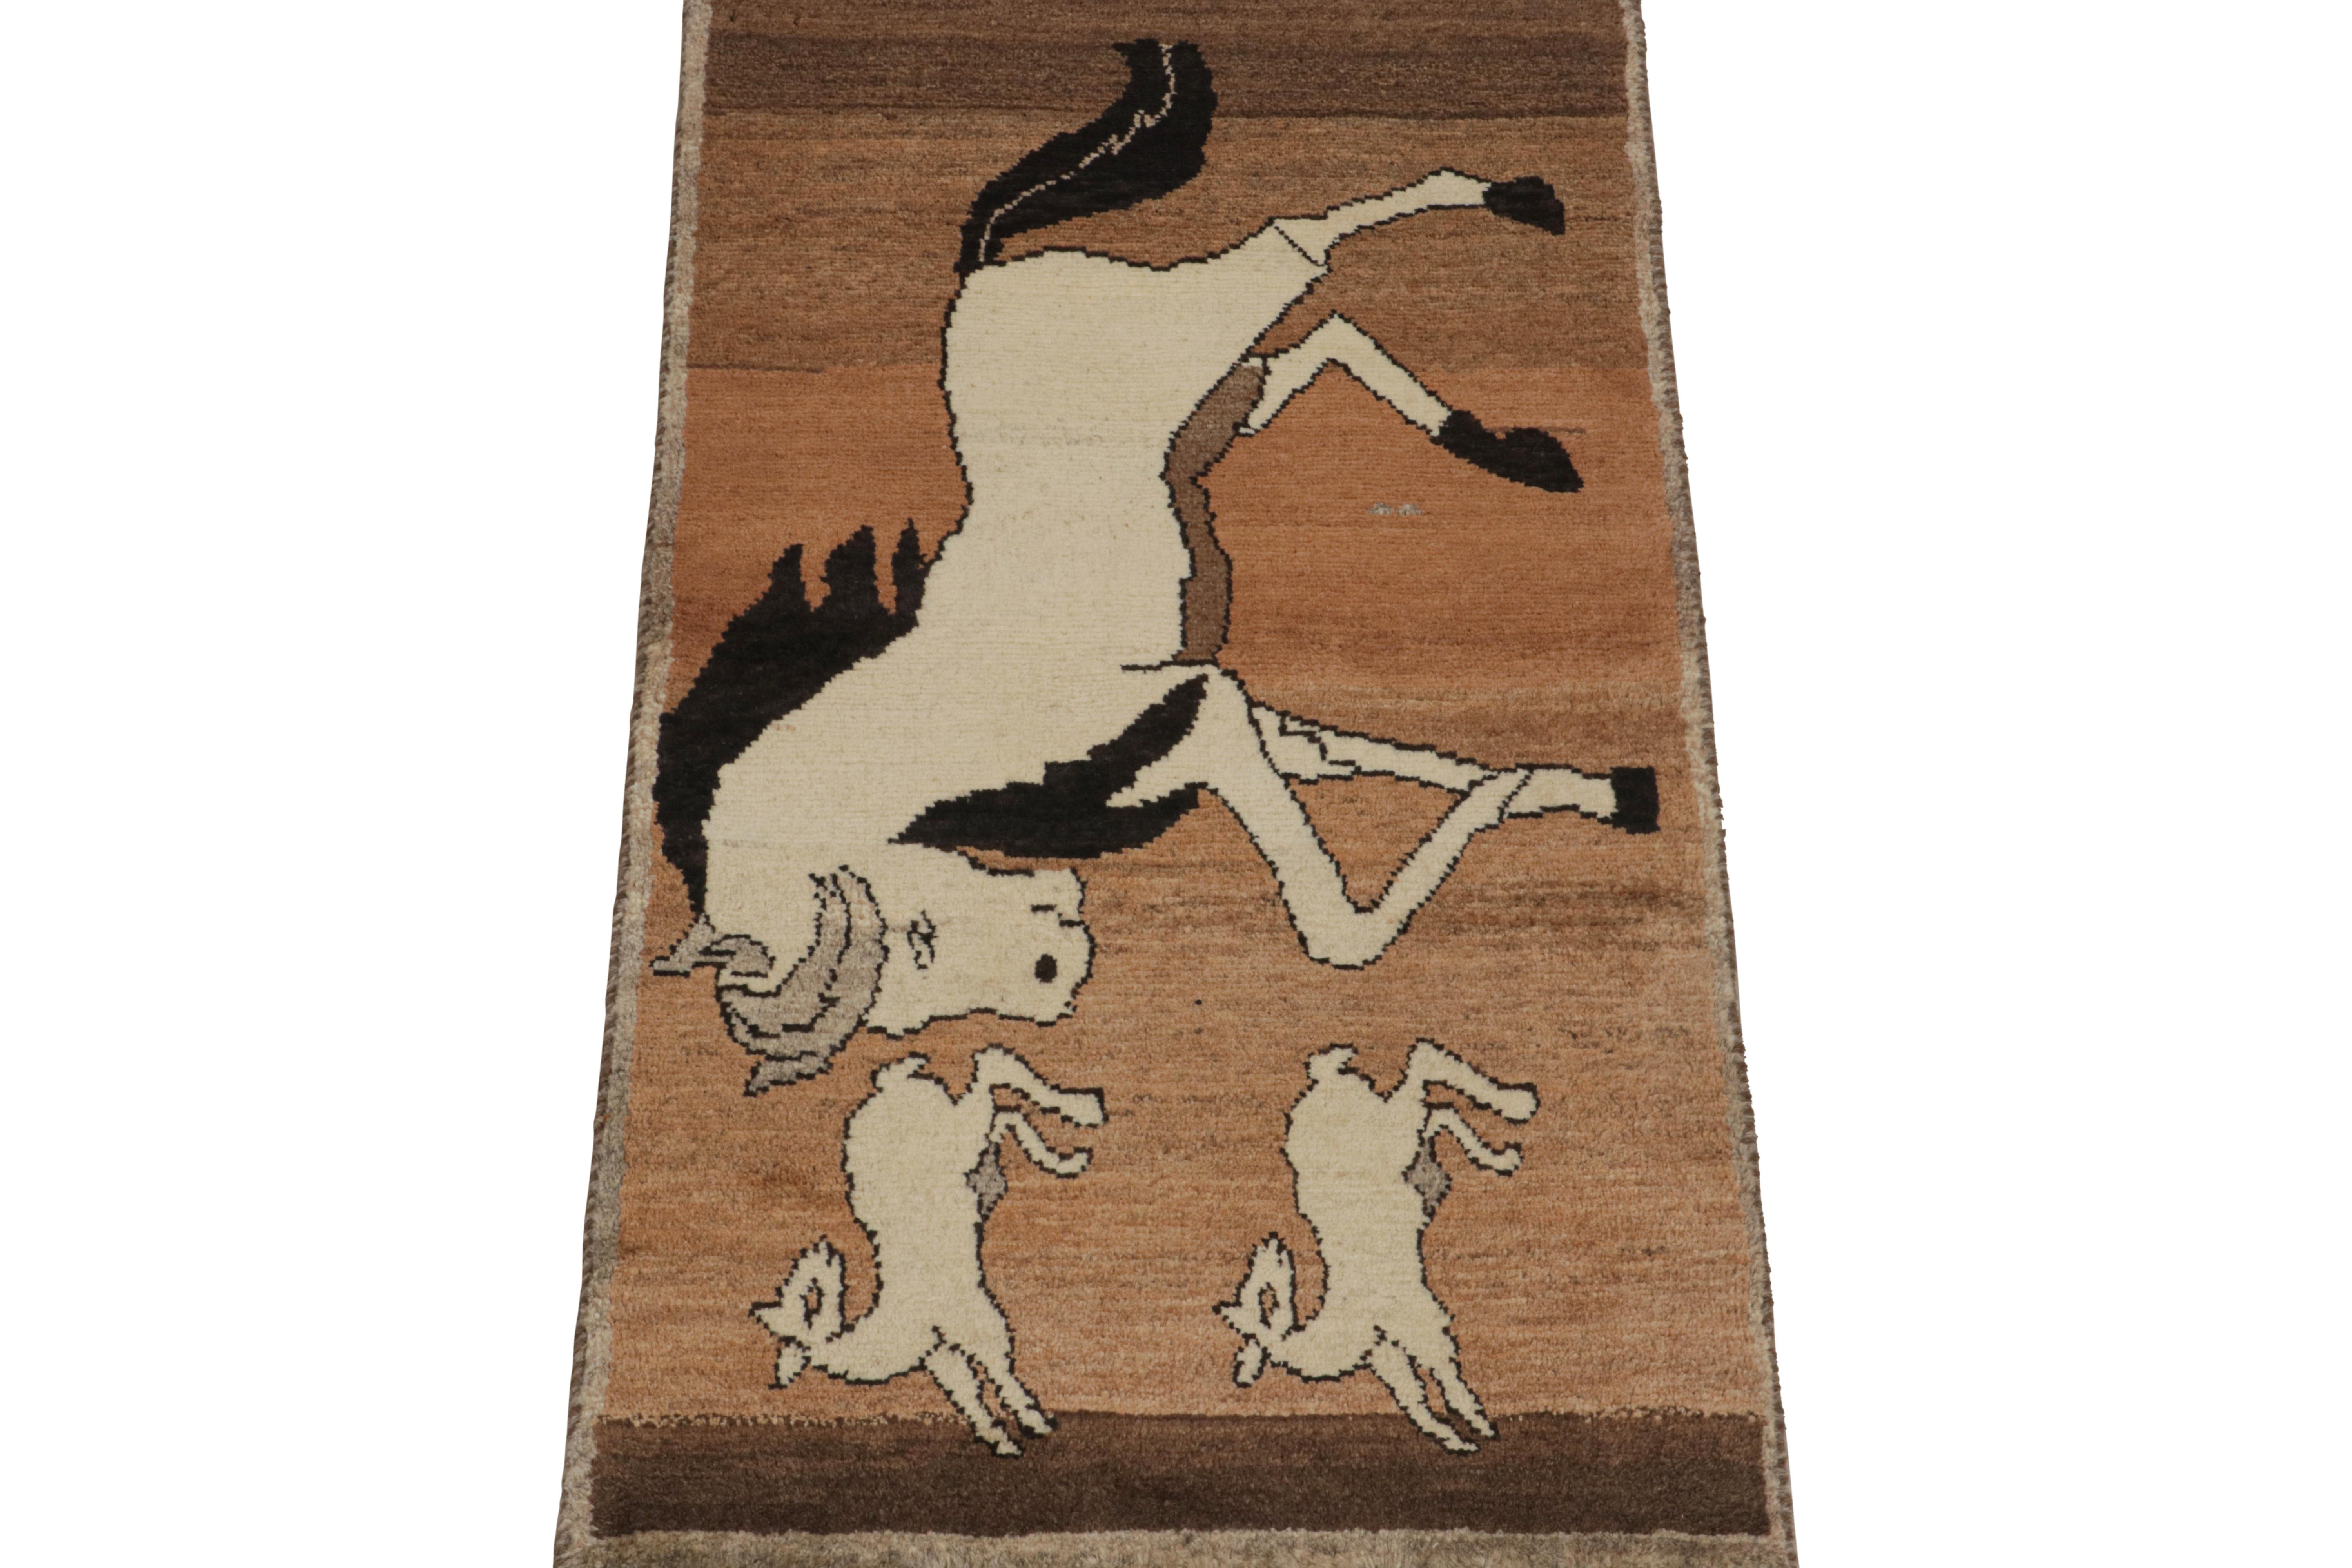 This vintage 2x5 Persian rug is a rare mid-century tribal piece, hand-knotted in wool circa 1950-1960.

Its design enjoys three pictorial horse patterns over a rich beige-brown field—one in large size and two smaller ones in off-white with black